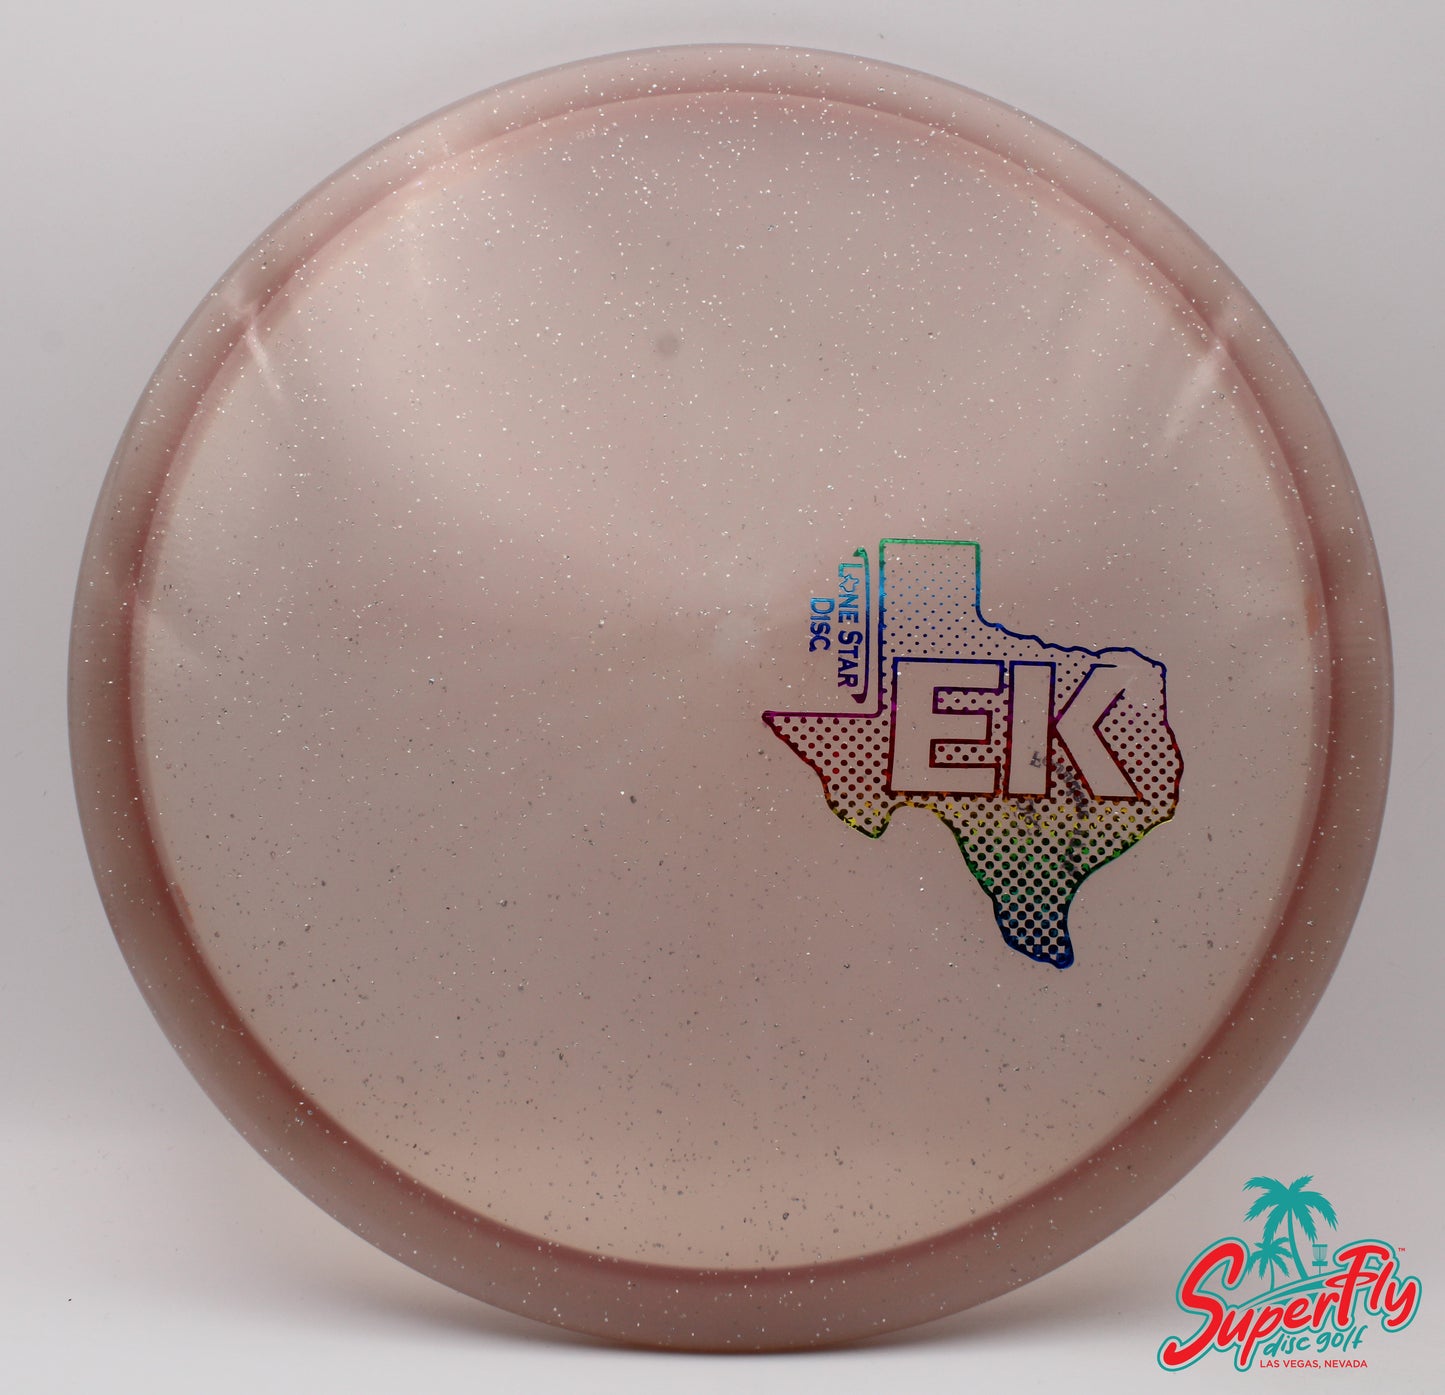 Lone Star Disc Emerson Keith Tour Series Founders BB6